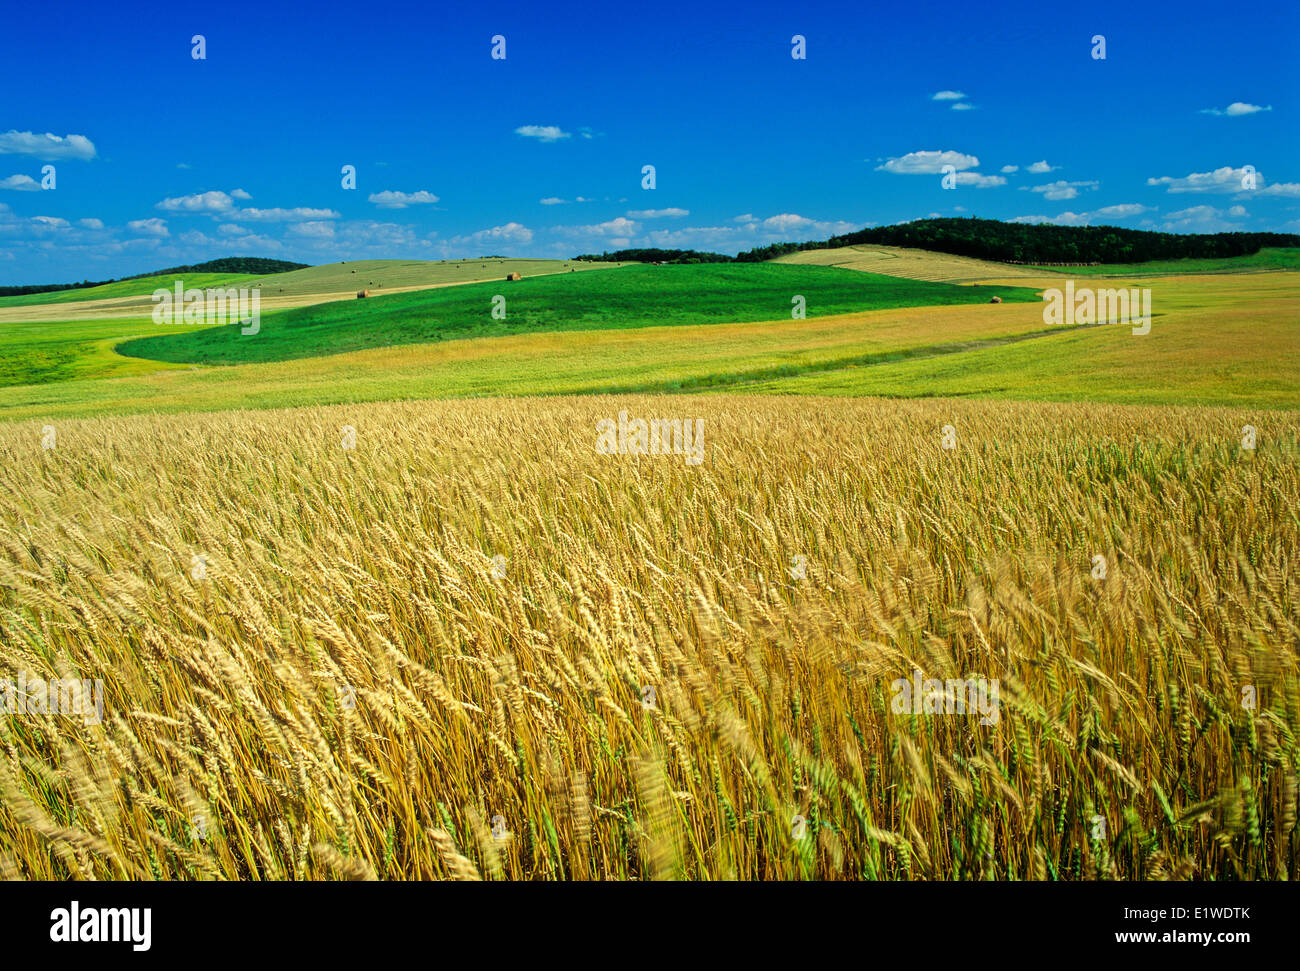 maturing spring wheat field with alfalfa fields in the distance, Tiger Hills, Manitoba, Canada Stock Photo